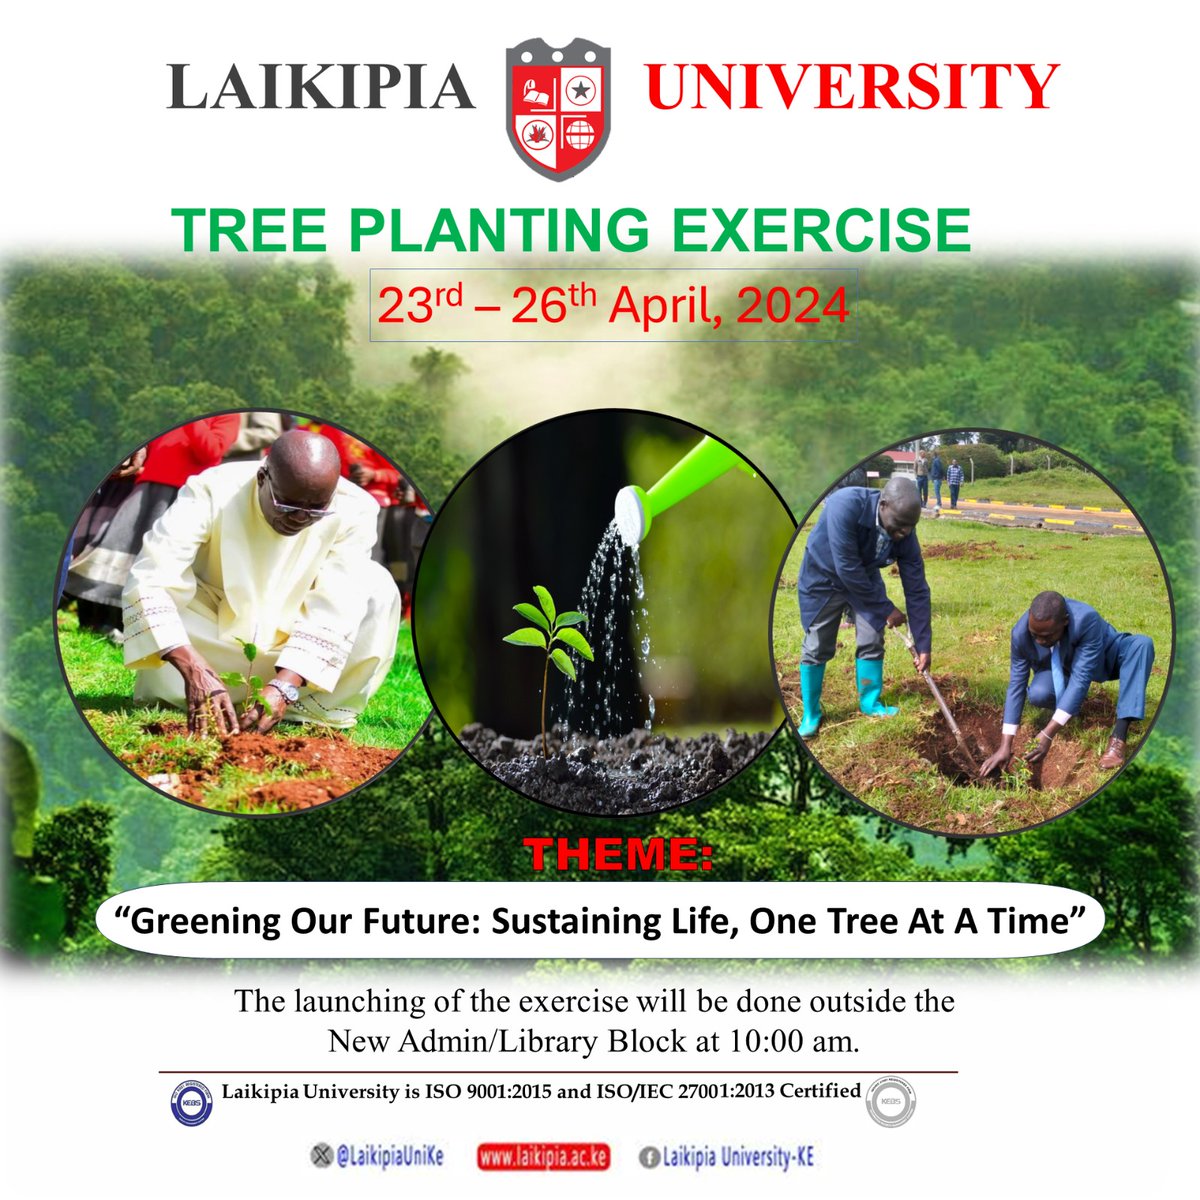 Happy New Week.  You are invited to be part of the tree planting exercise happening as from tomorrow, 23rd April 2024 to Friday, 26th April 2024. #greeningourfuture #sustainingourlives #onetreeatatime